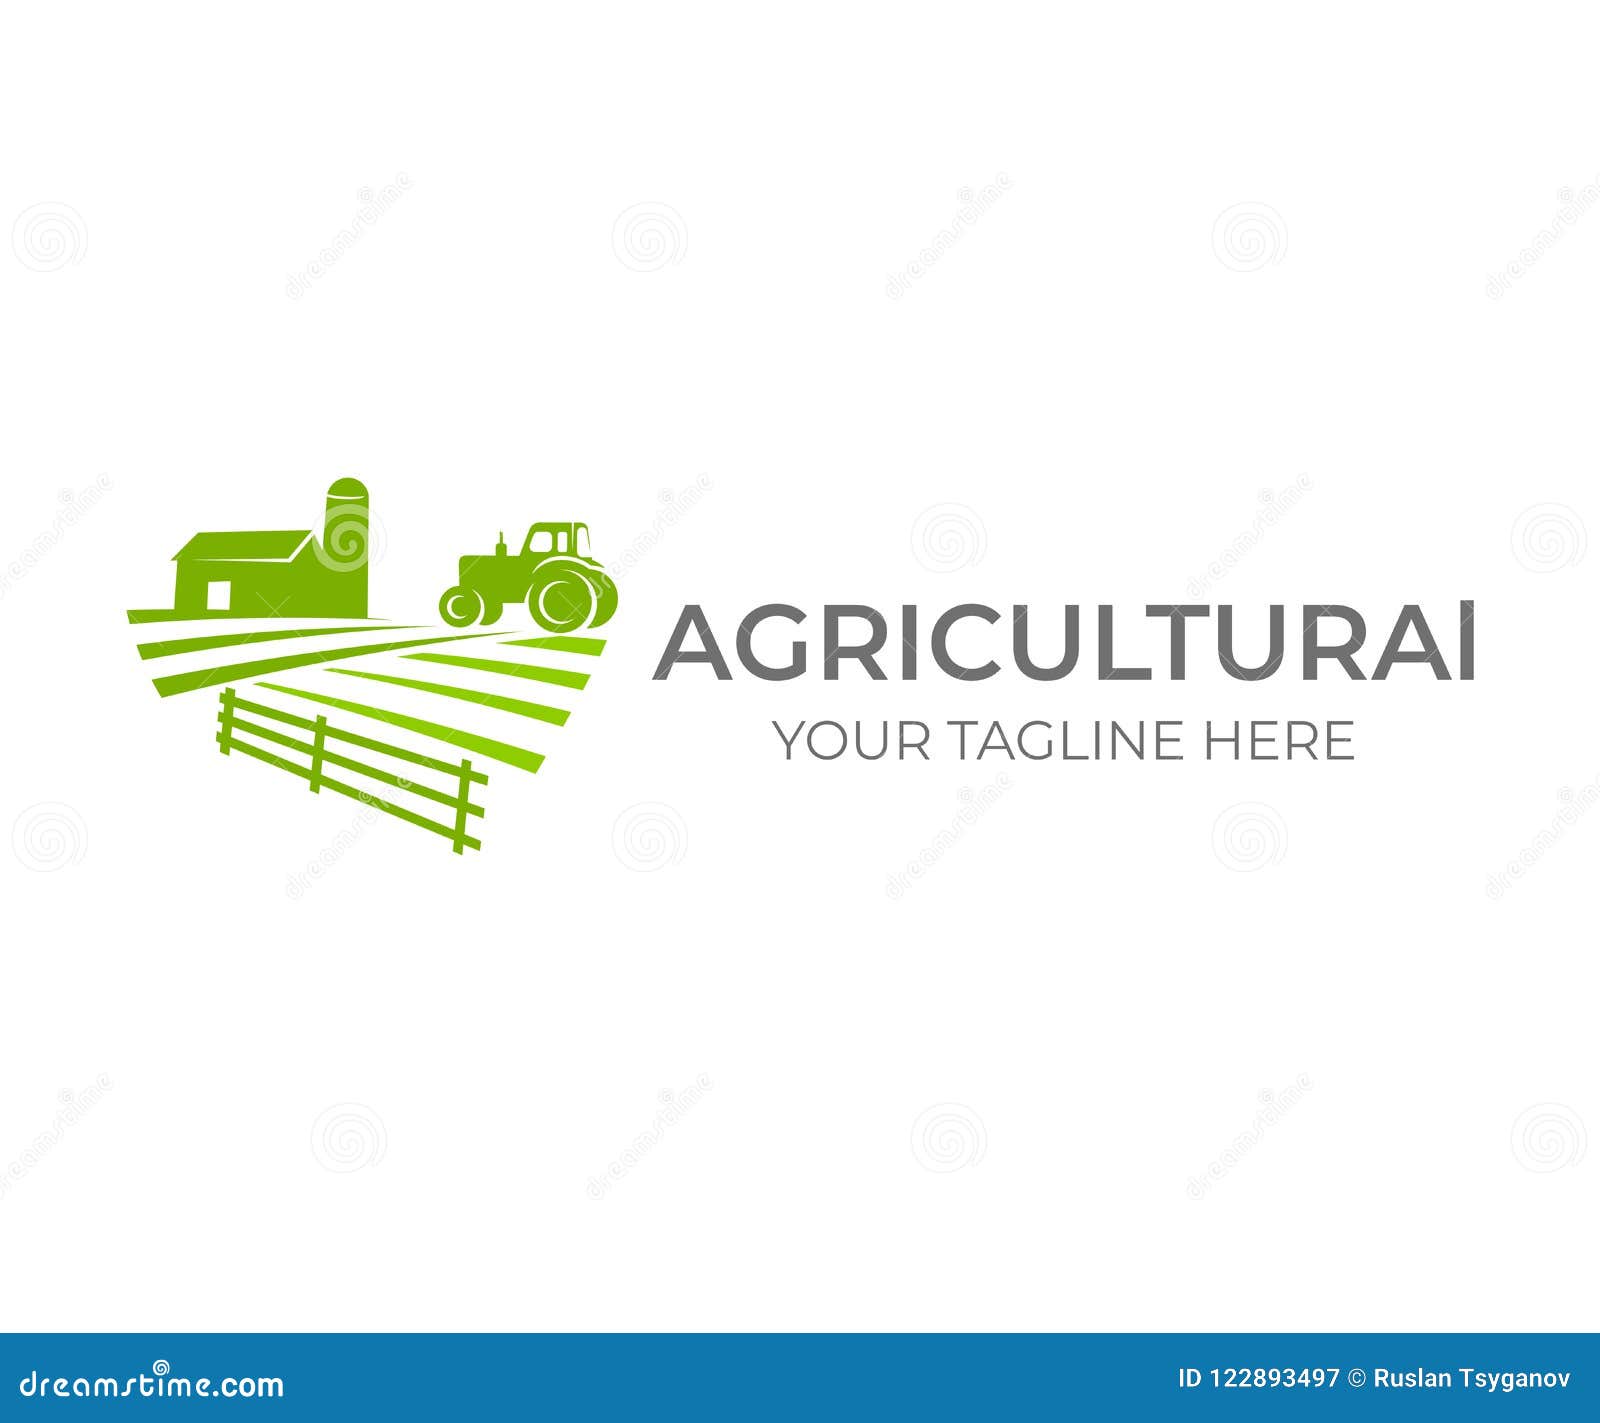 agricultural, agriculture and farming with farm and tractor on field, logo . agribusiness, eco farm, barn with silo in rural